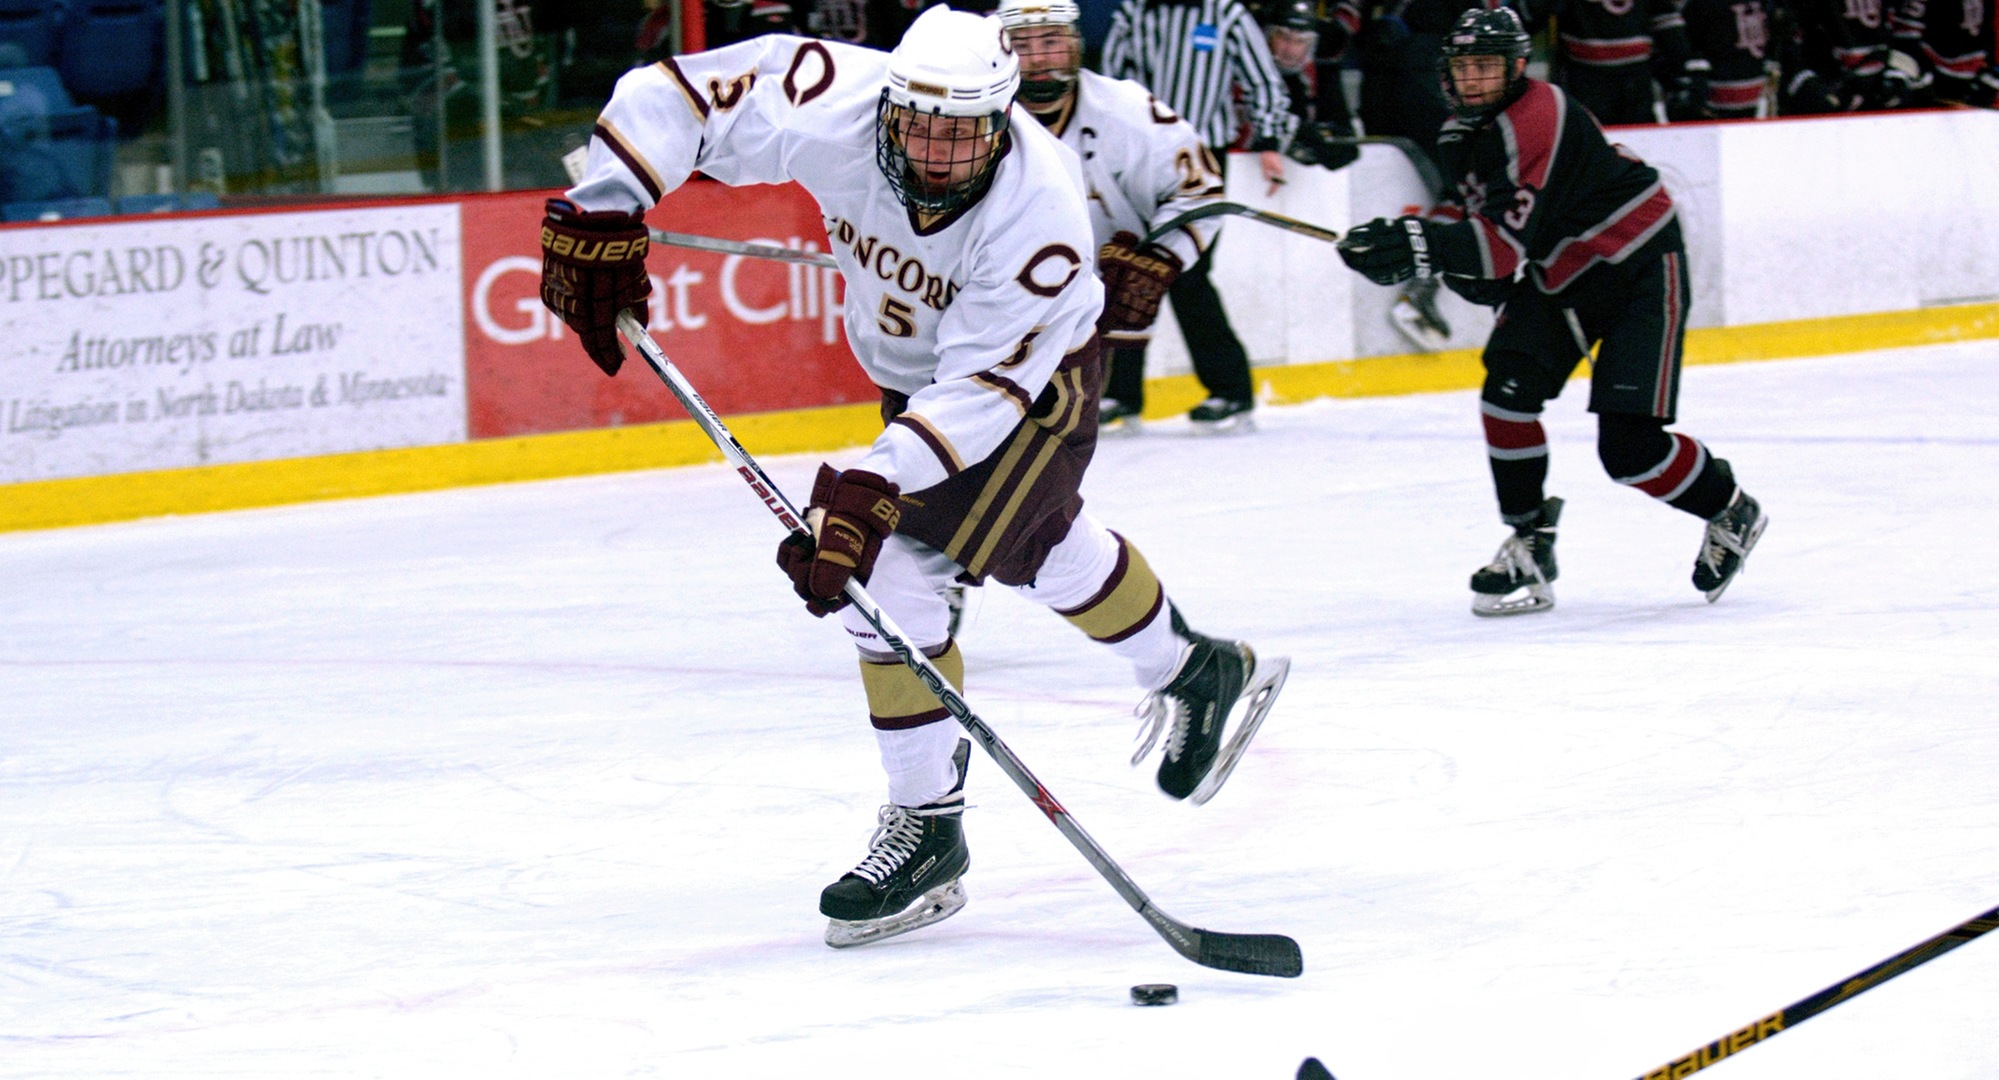 Freshman Tanner Okeson scored his first collegiate goal in the Cobbers' series finale at Augsburg.